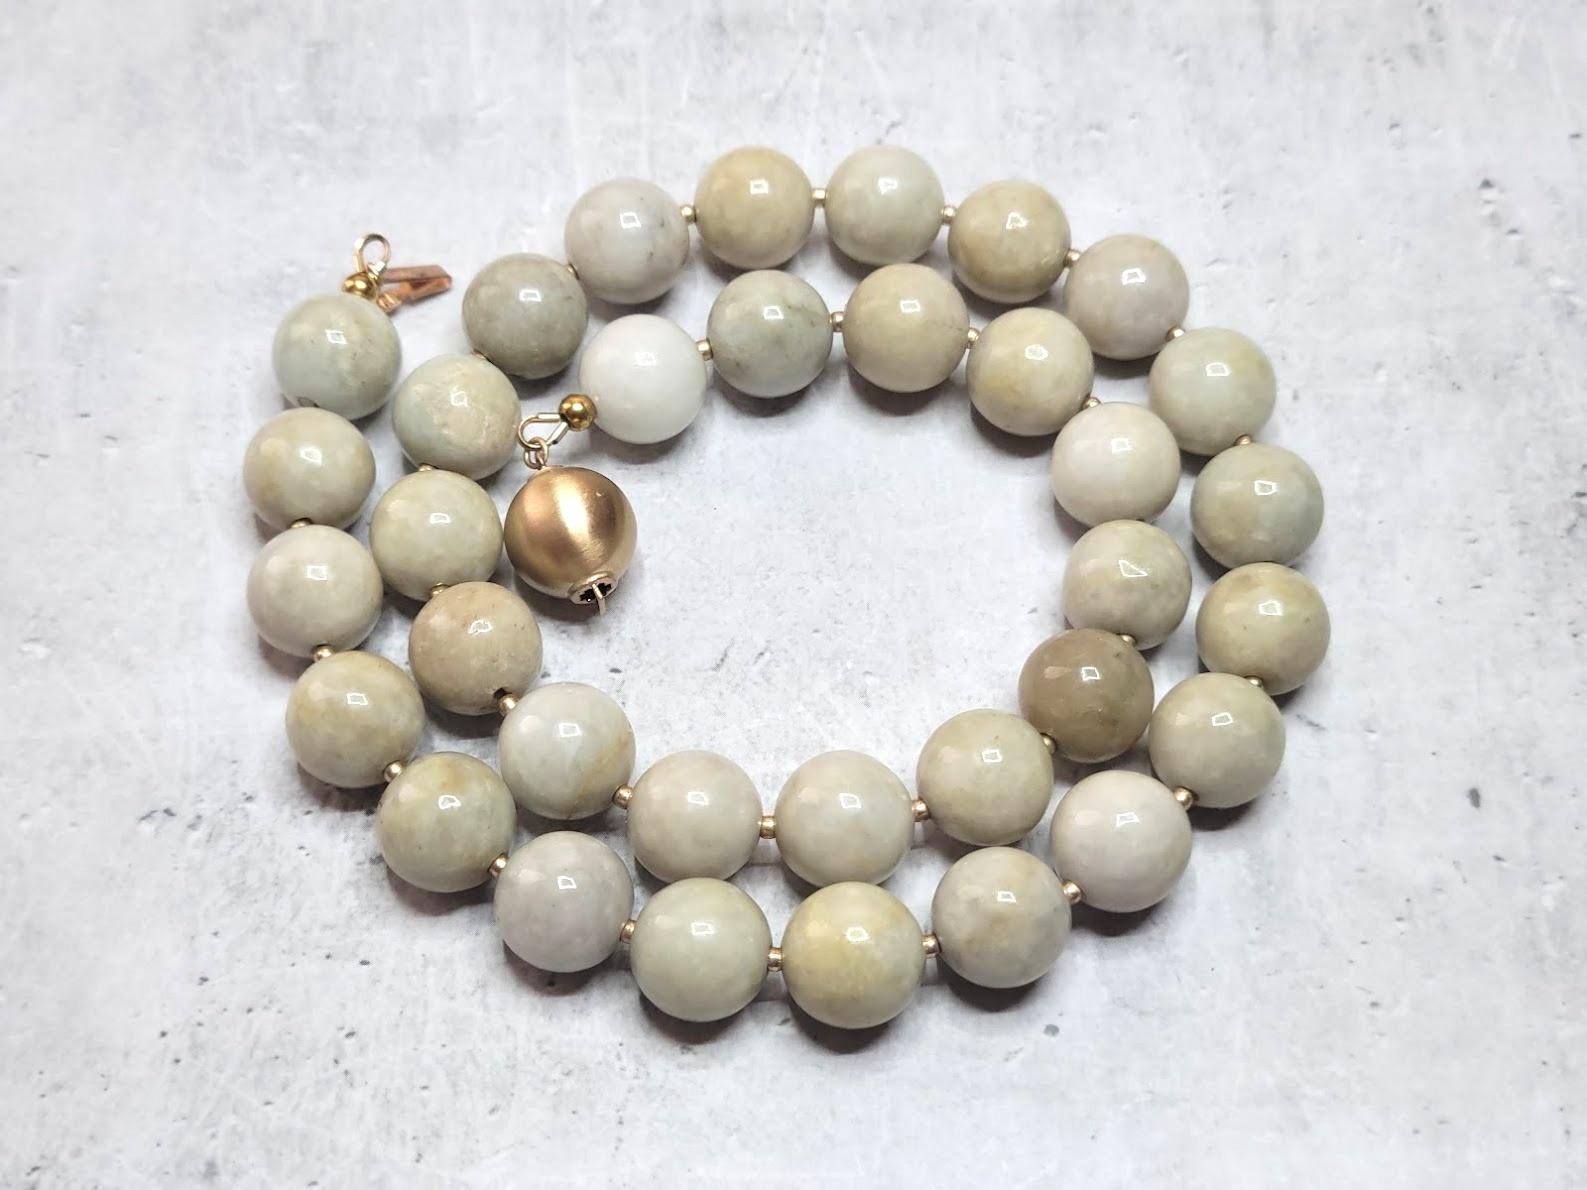 The jade beads on this necklace are undyed, untreated natural creamy honey tan jades of excellent quality. The jade beads are old. Each bead is cut and polished by hand. Presumably, the beads belong to the period of the Qing Dynasty (1644 -